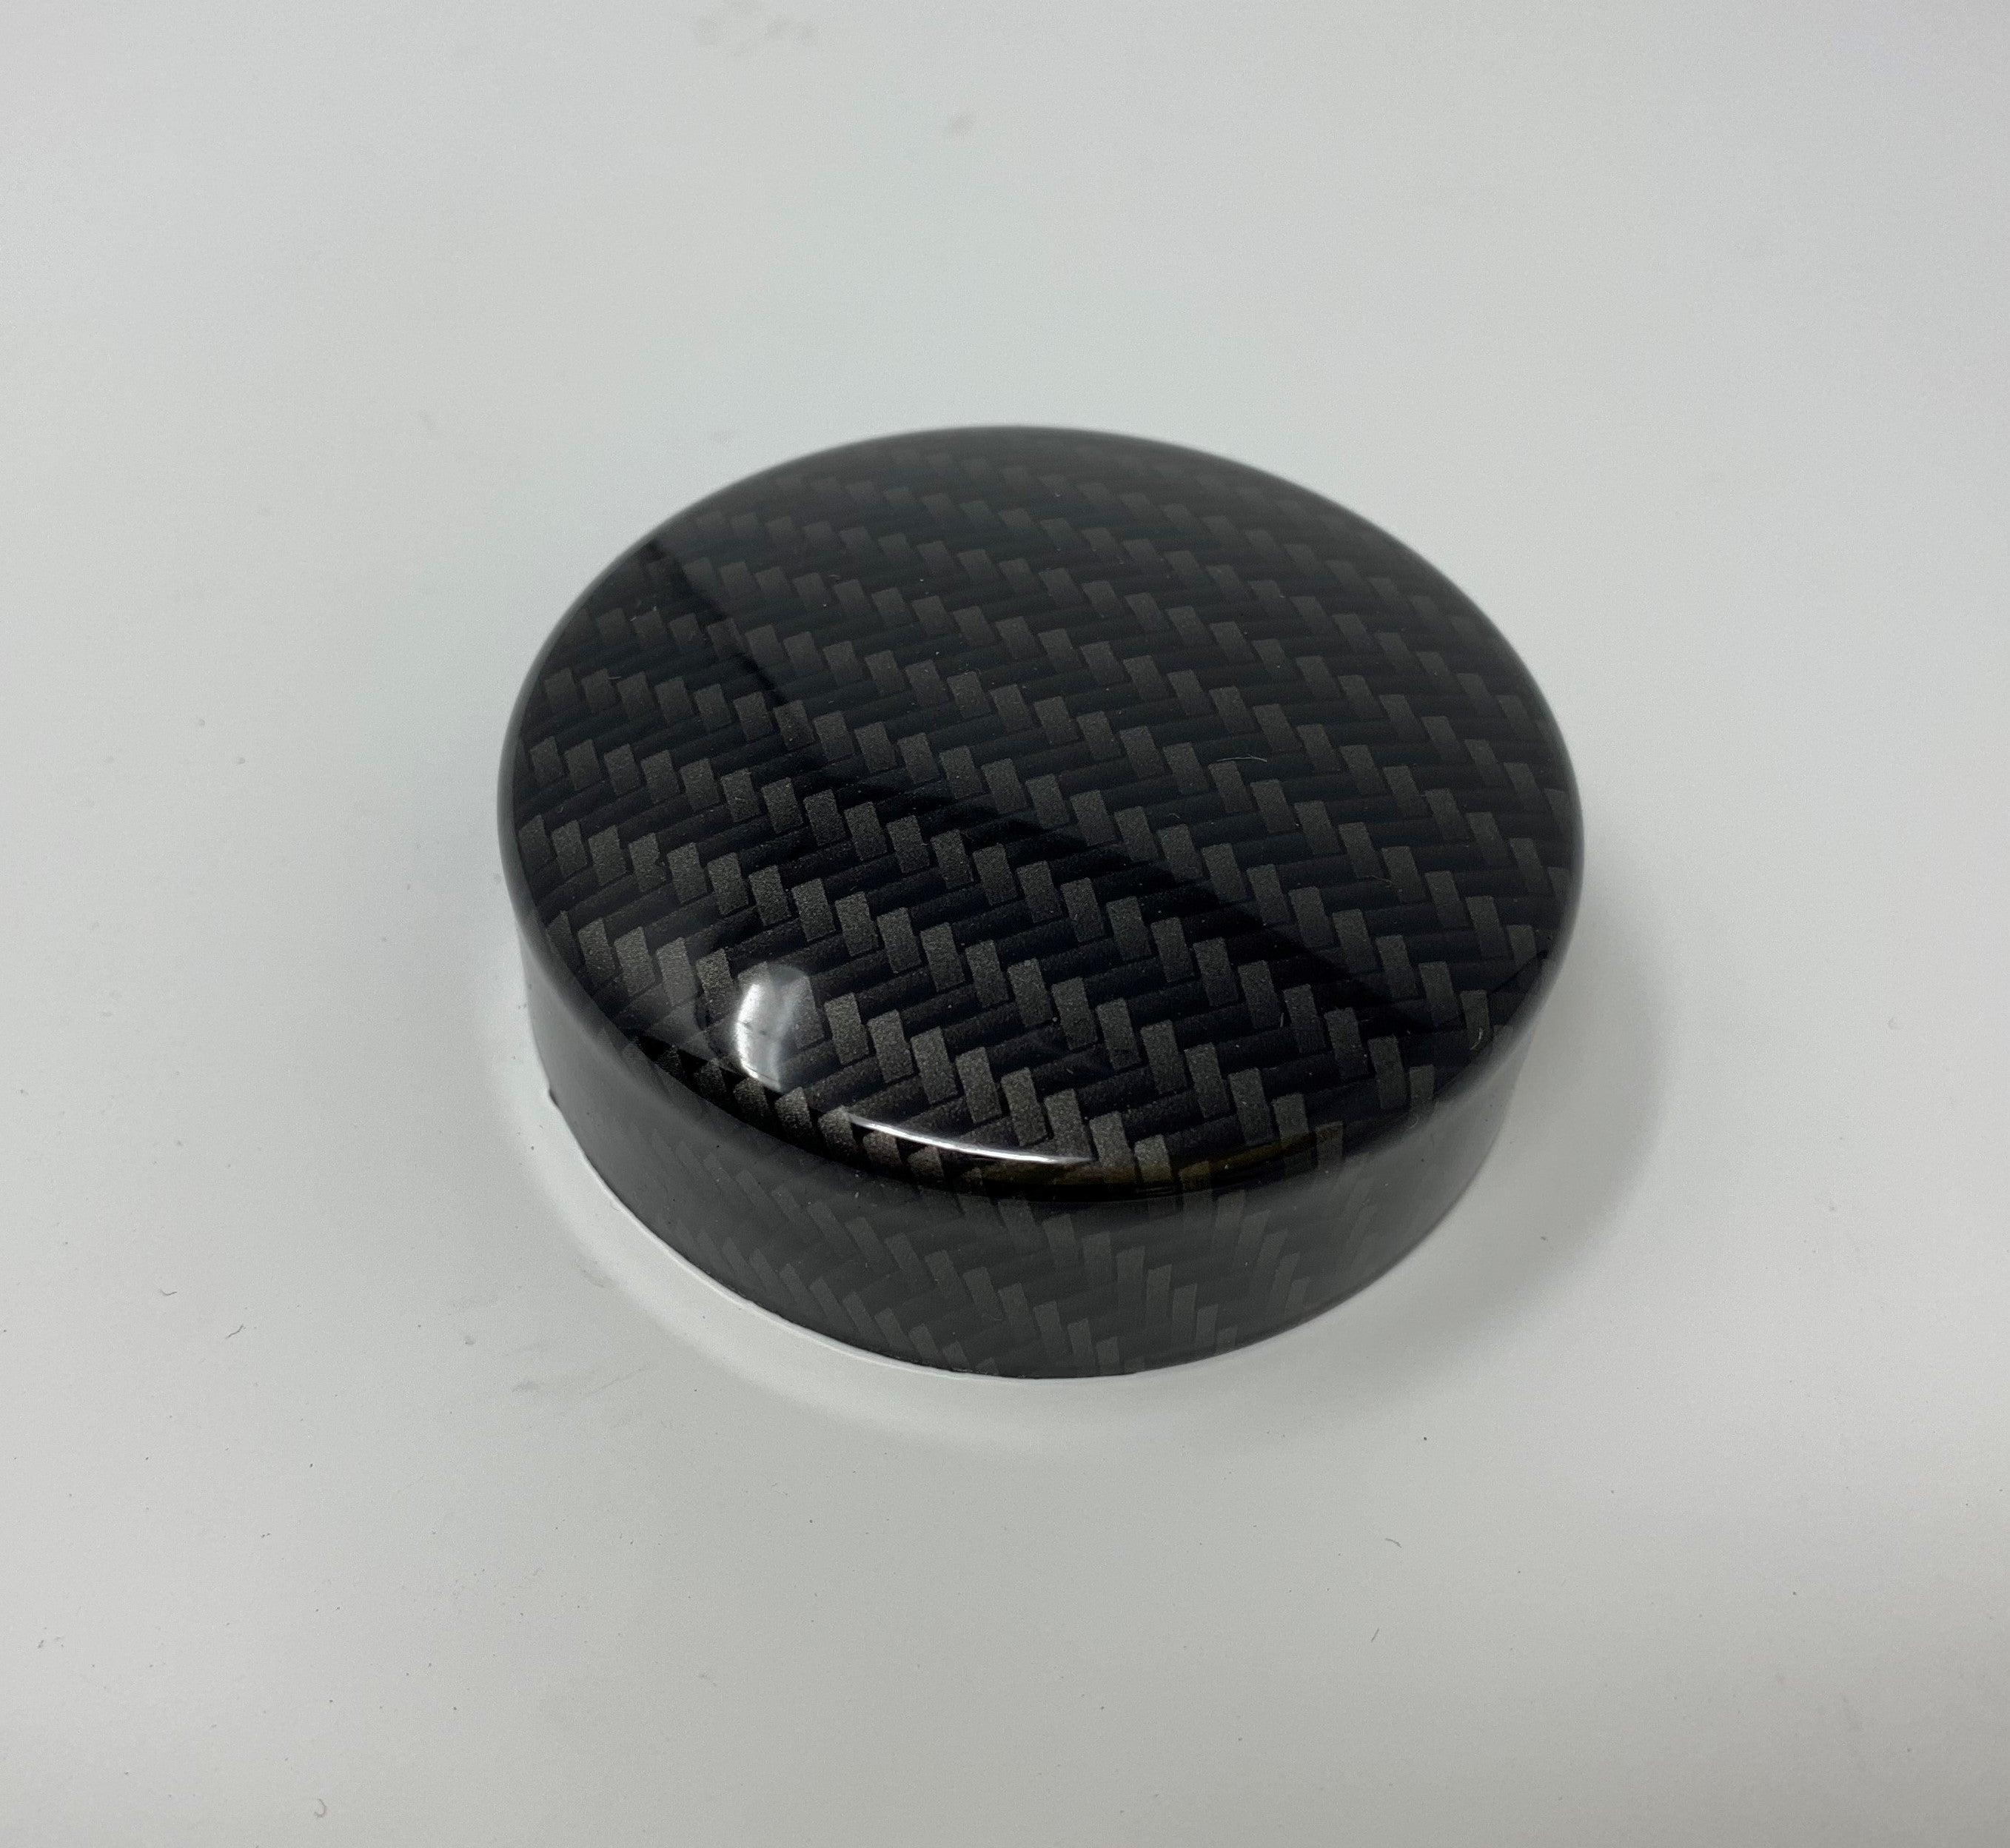 Proform Power Steering Cap Cover - Mk6 Ford Fiesta (Plastic Finishes)